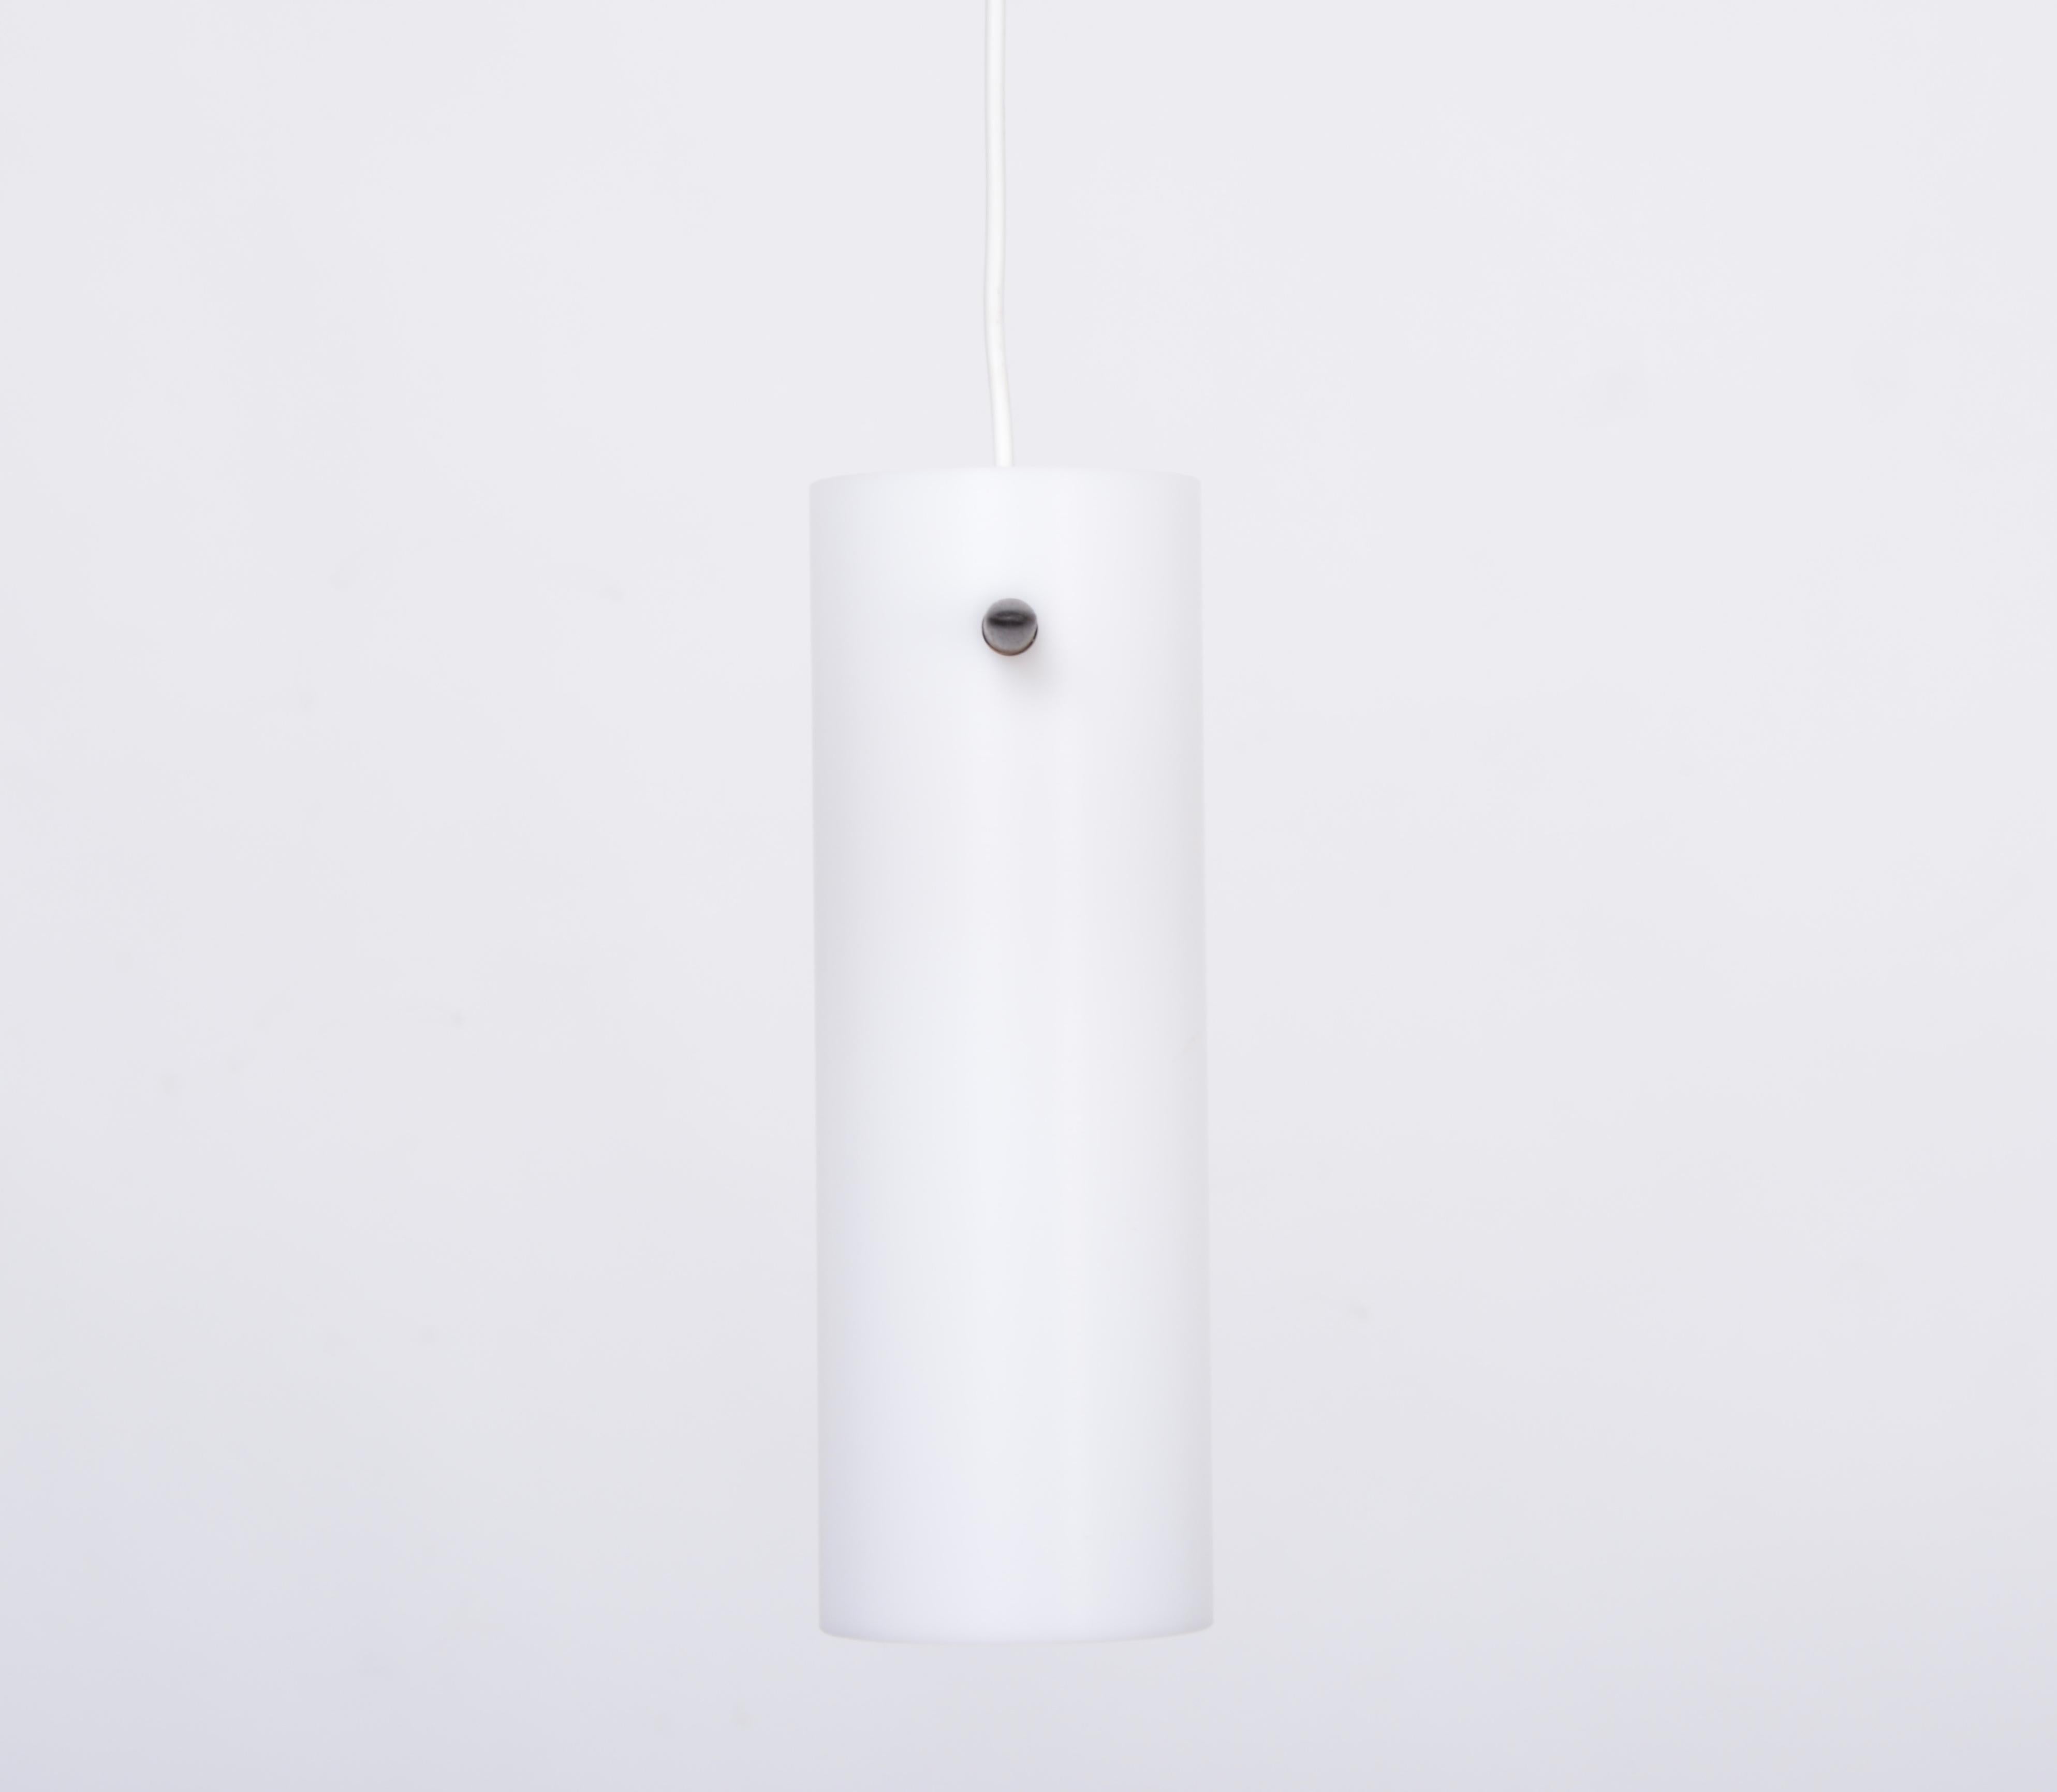 This minimal Mid-Century Modern pendant lamp or hanging light was designed by Swedish brothers Uno & Östen Kristiansson and produced by their company Luxus in Vittsjö, Sweden. This model is number 535 and was designed in the 1950s. It features a